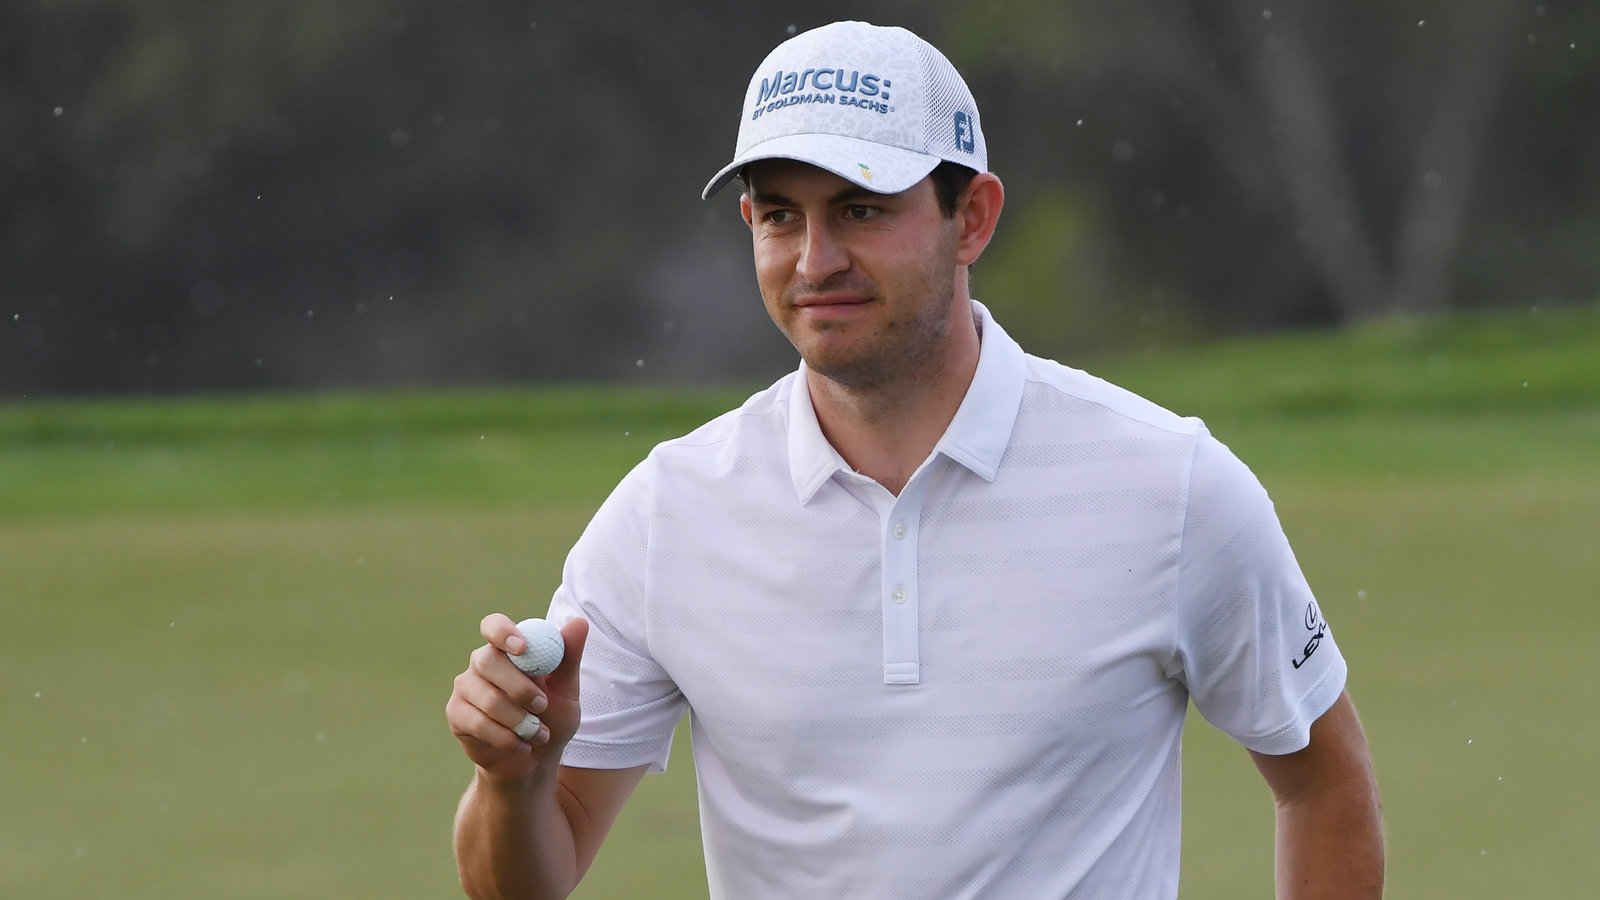 Patrick Cantlay Too Steady, Goes To 20-Under At Tour Championship